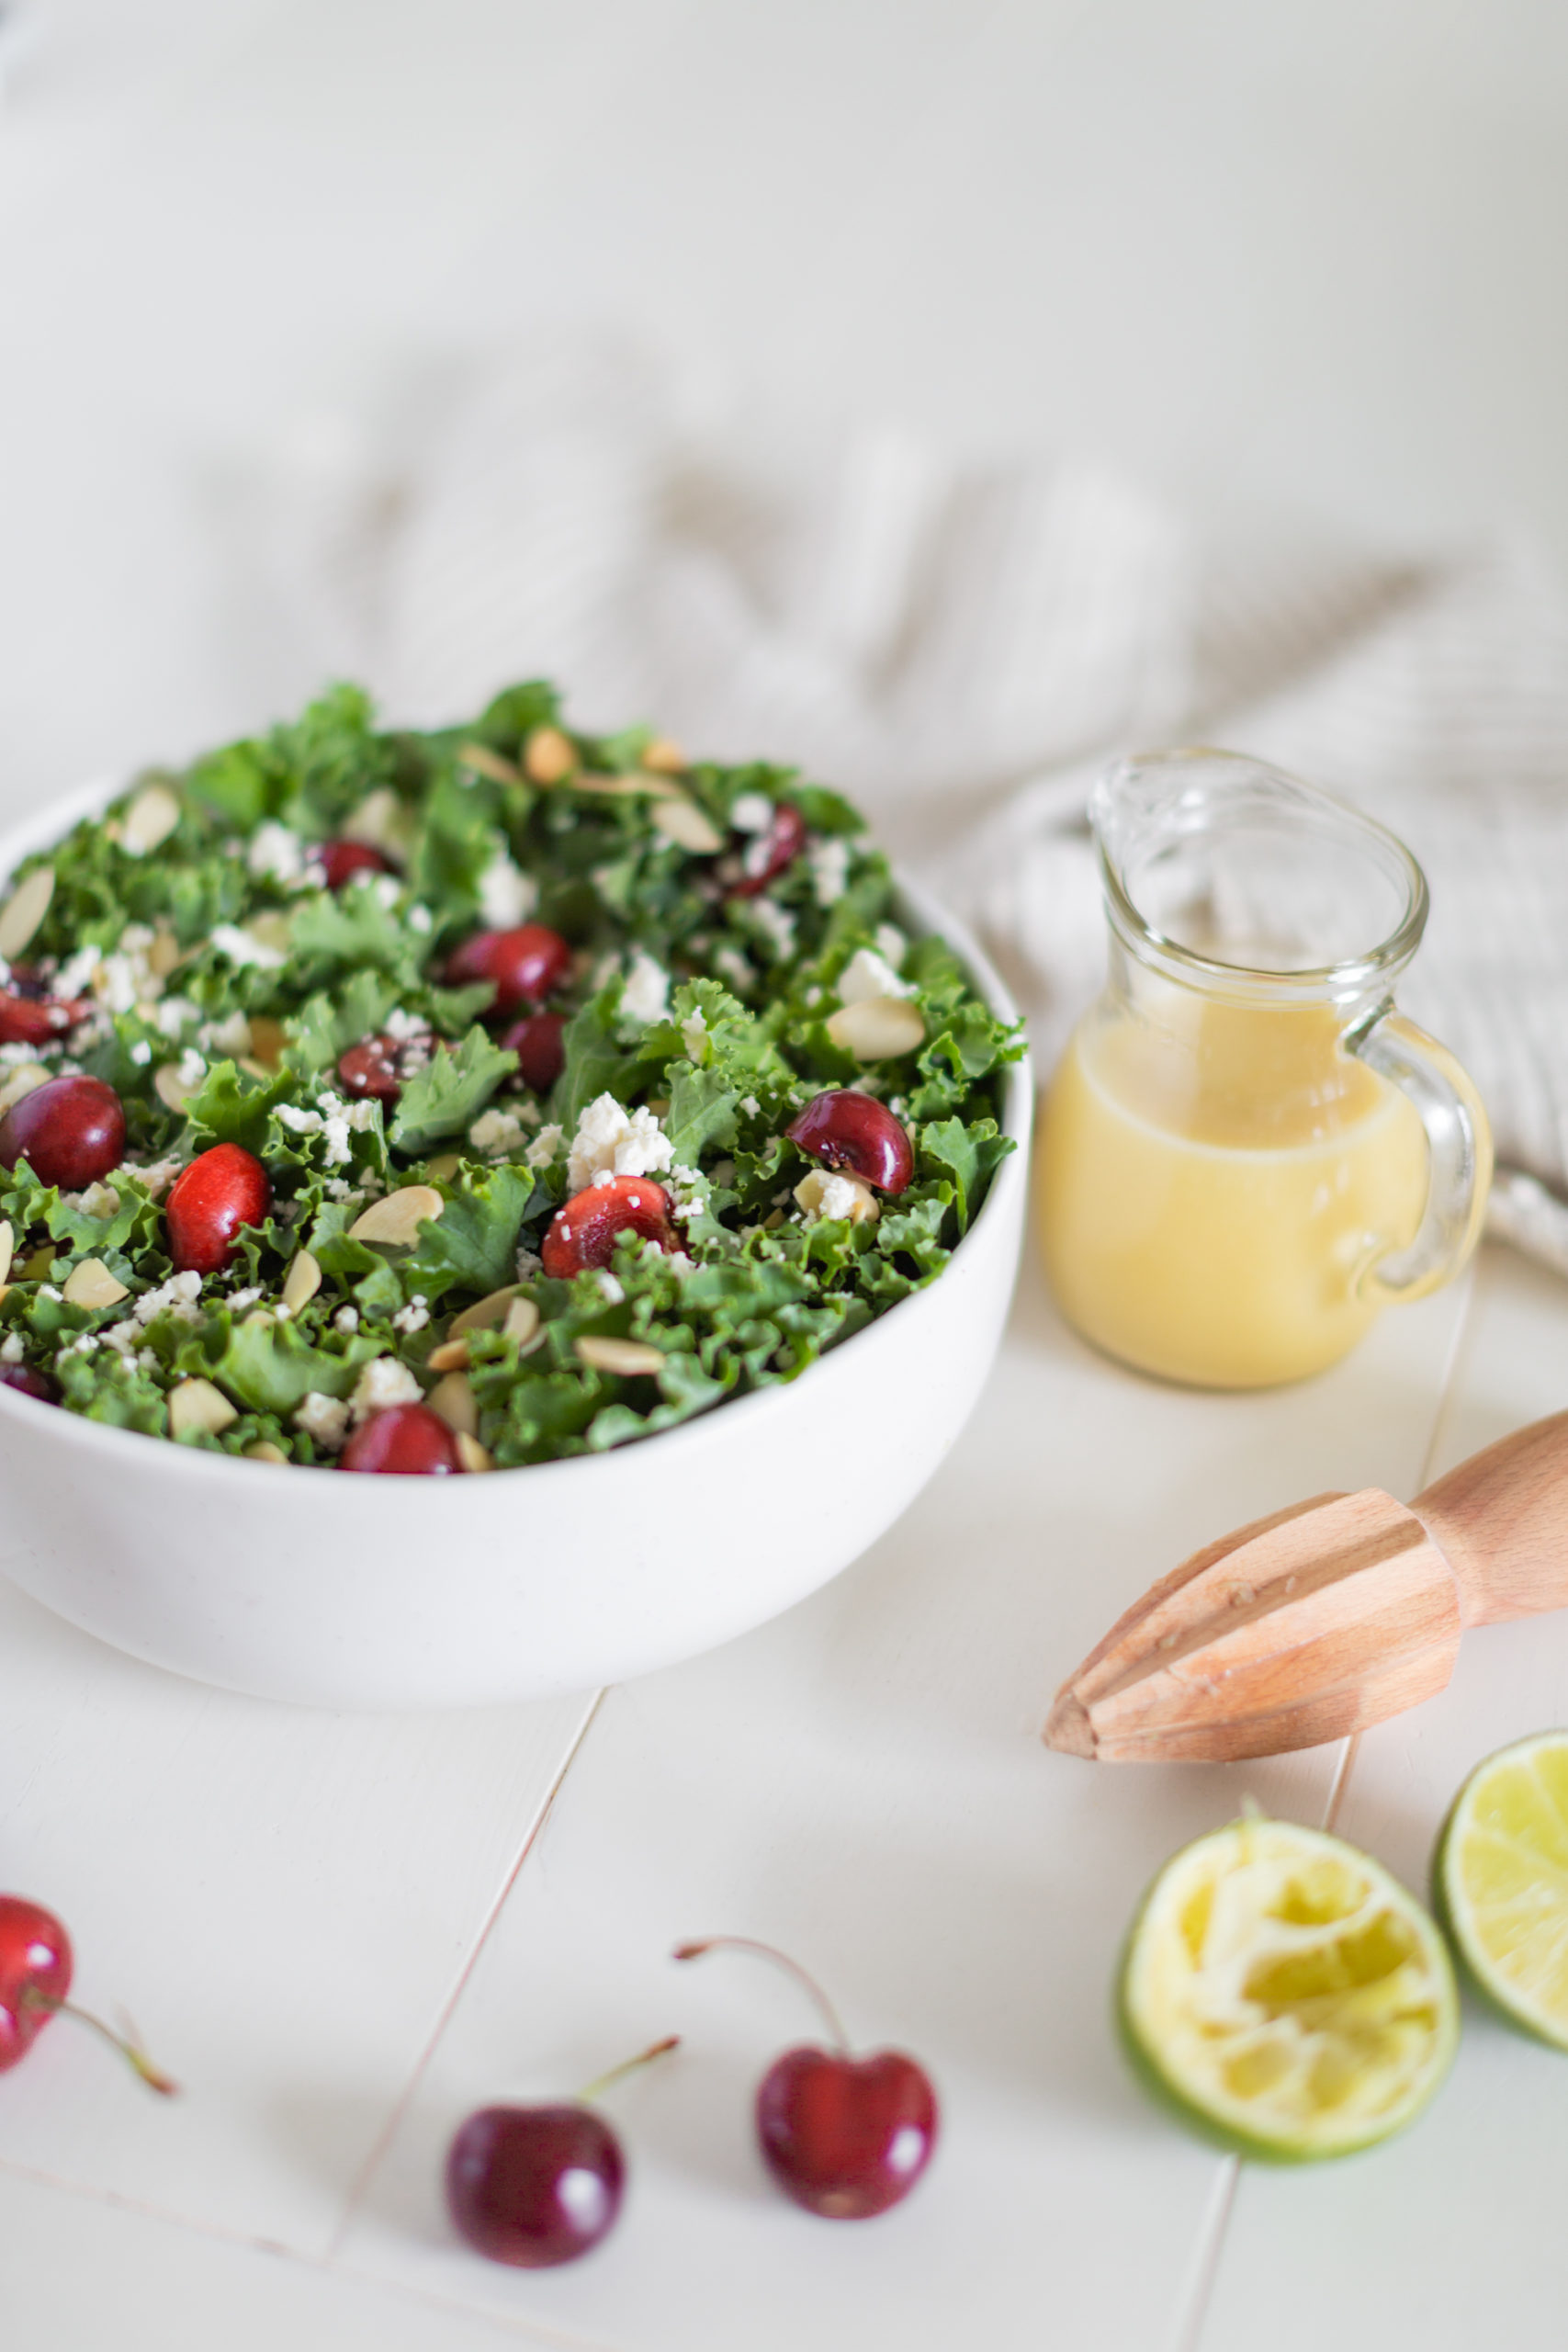 Okanagan Kale Salad loaded with fresh cherries, feta cheese and toasted almonds with a light honey lime vinaigrette